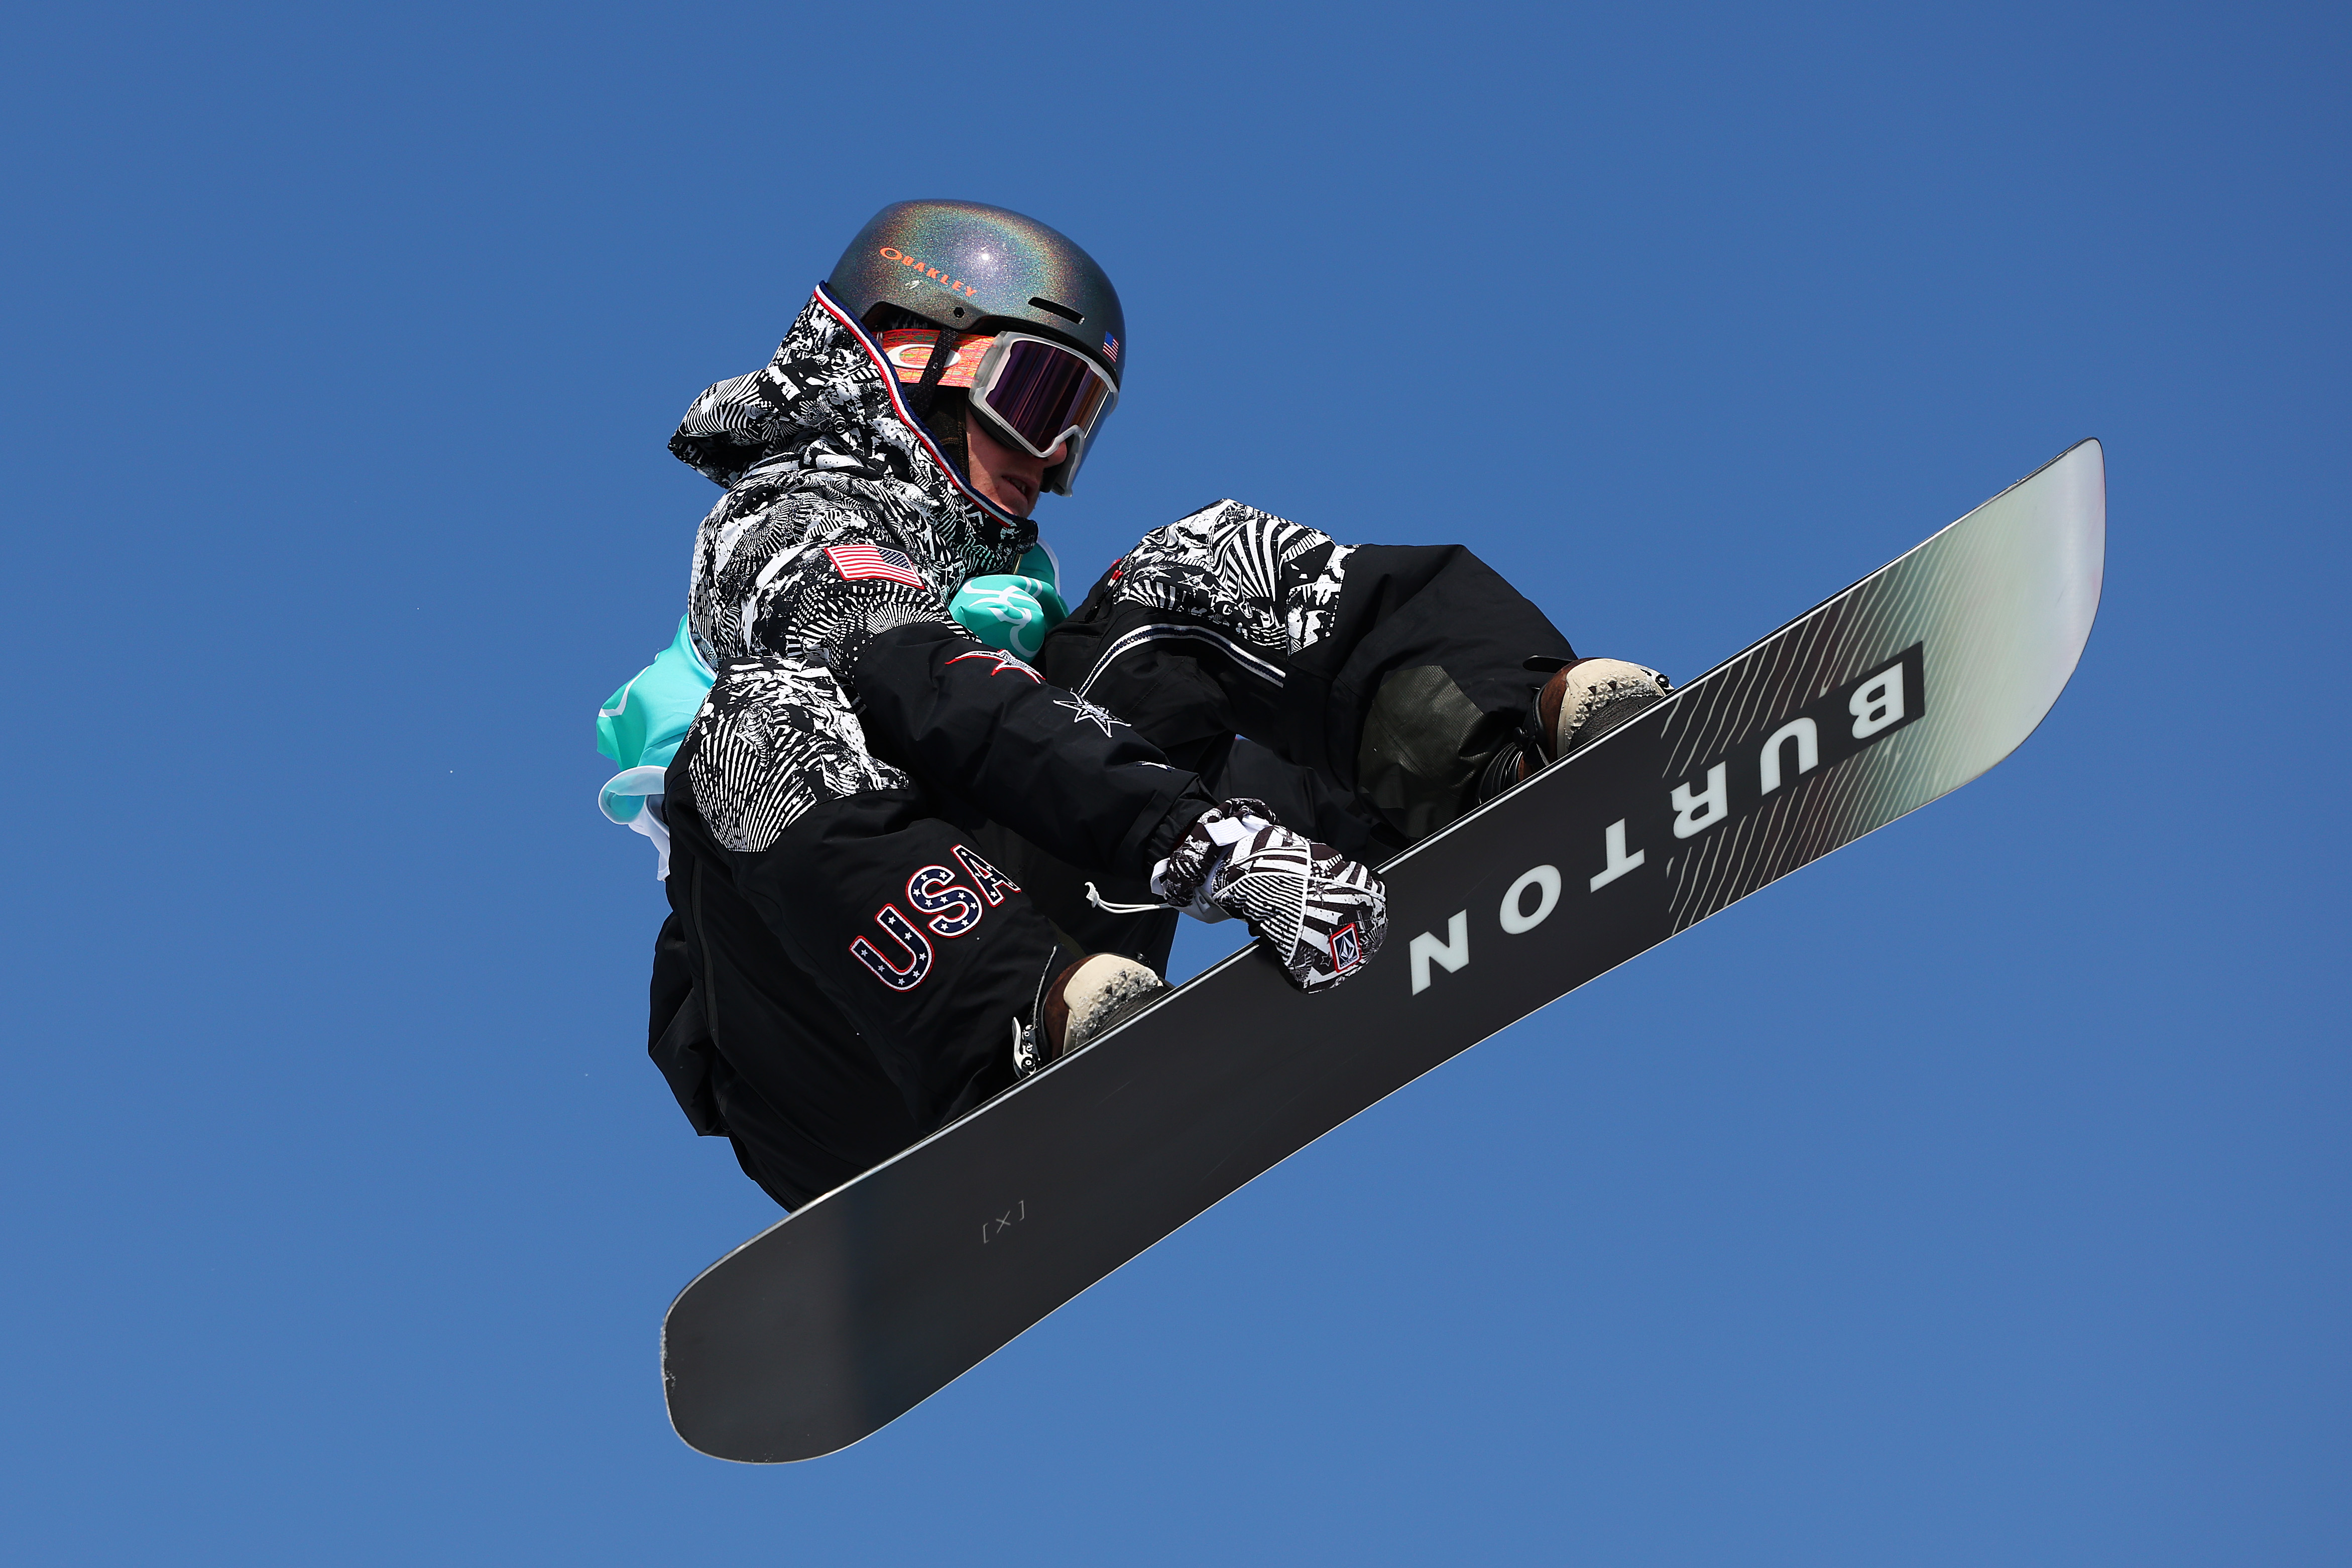 Team USAs Red Gerard Places Fifth in Snowboard Big Air